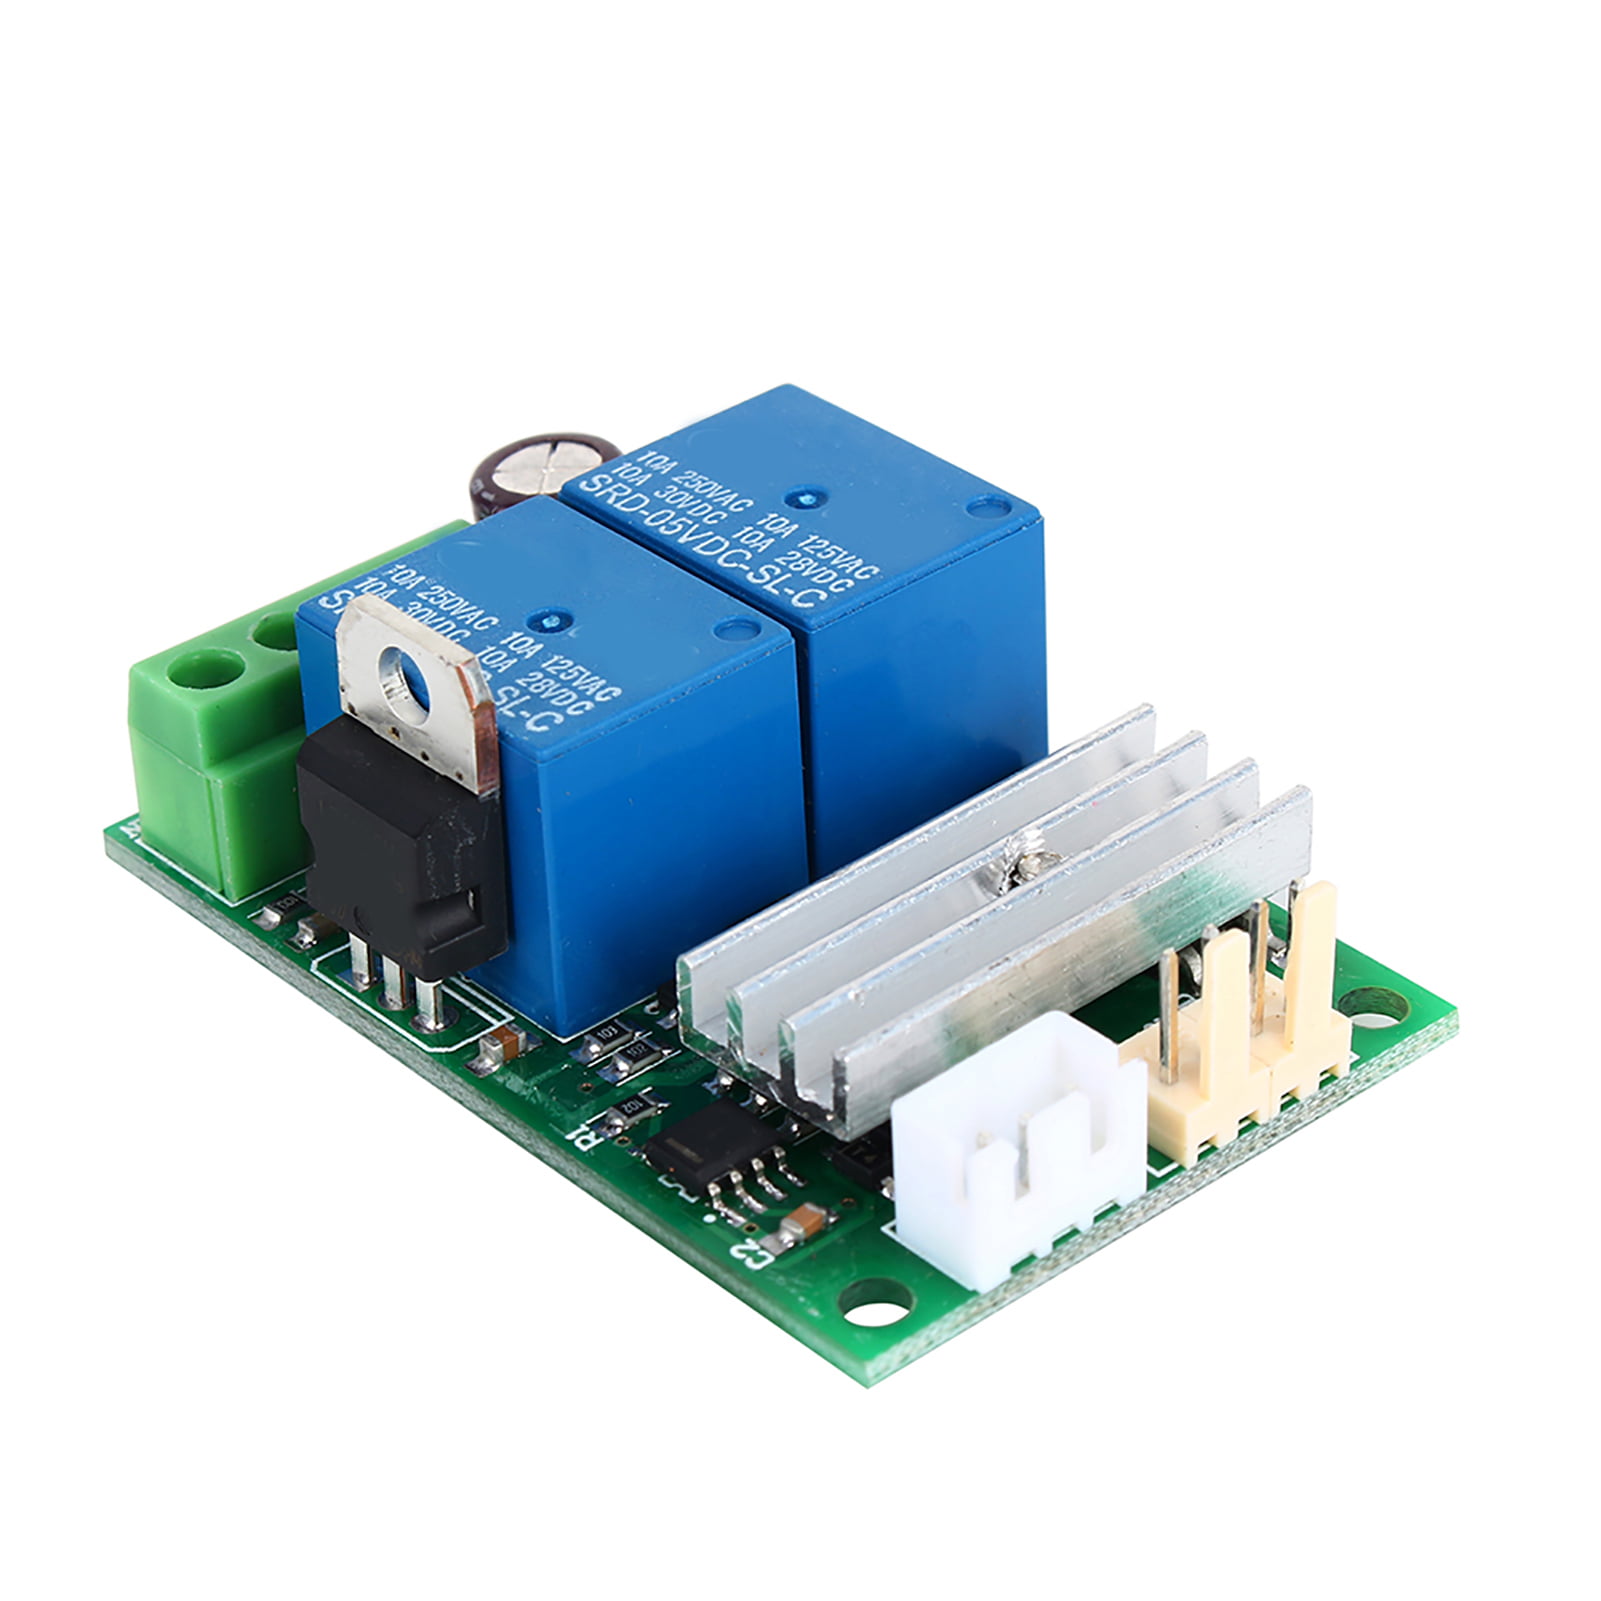 DC Motor Speed Controller,DC6V 9V 12V 24V 3A Motor Pump Speed Controller,Control the Forward or Reverse Direction and The Stop of DC Motor by Button Switch 